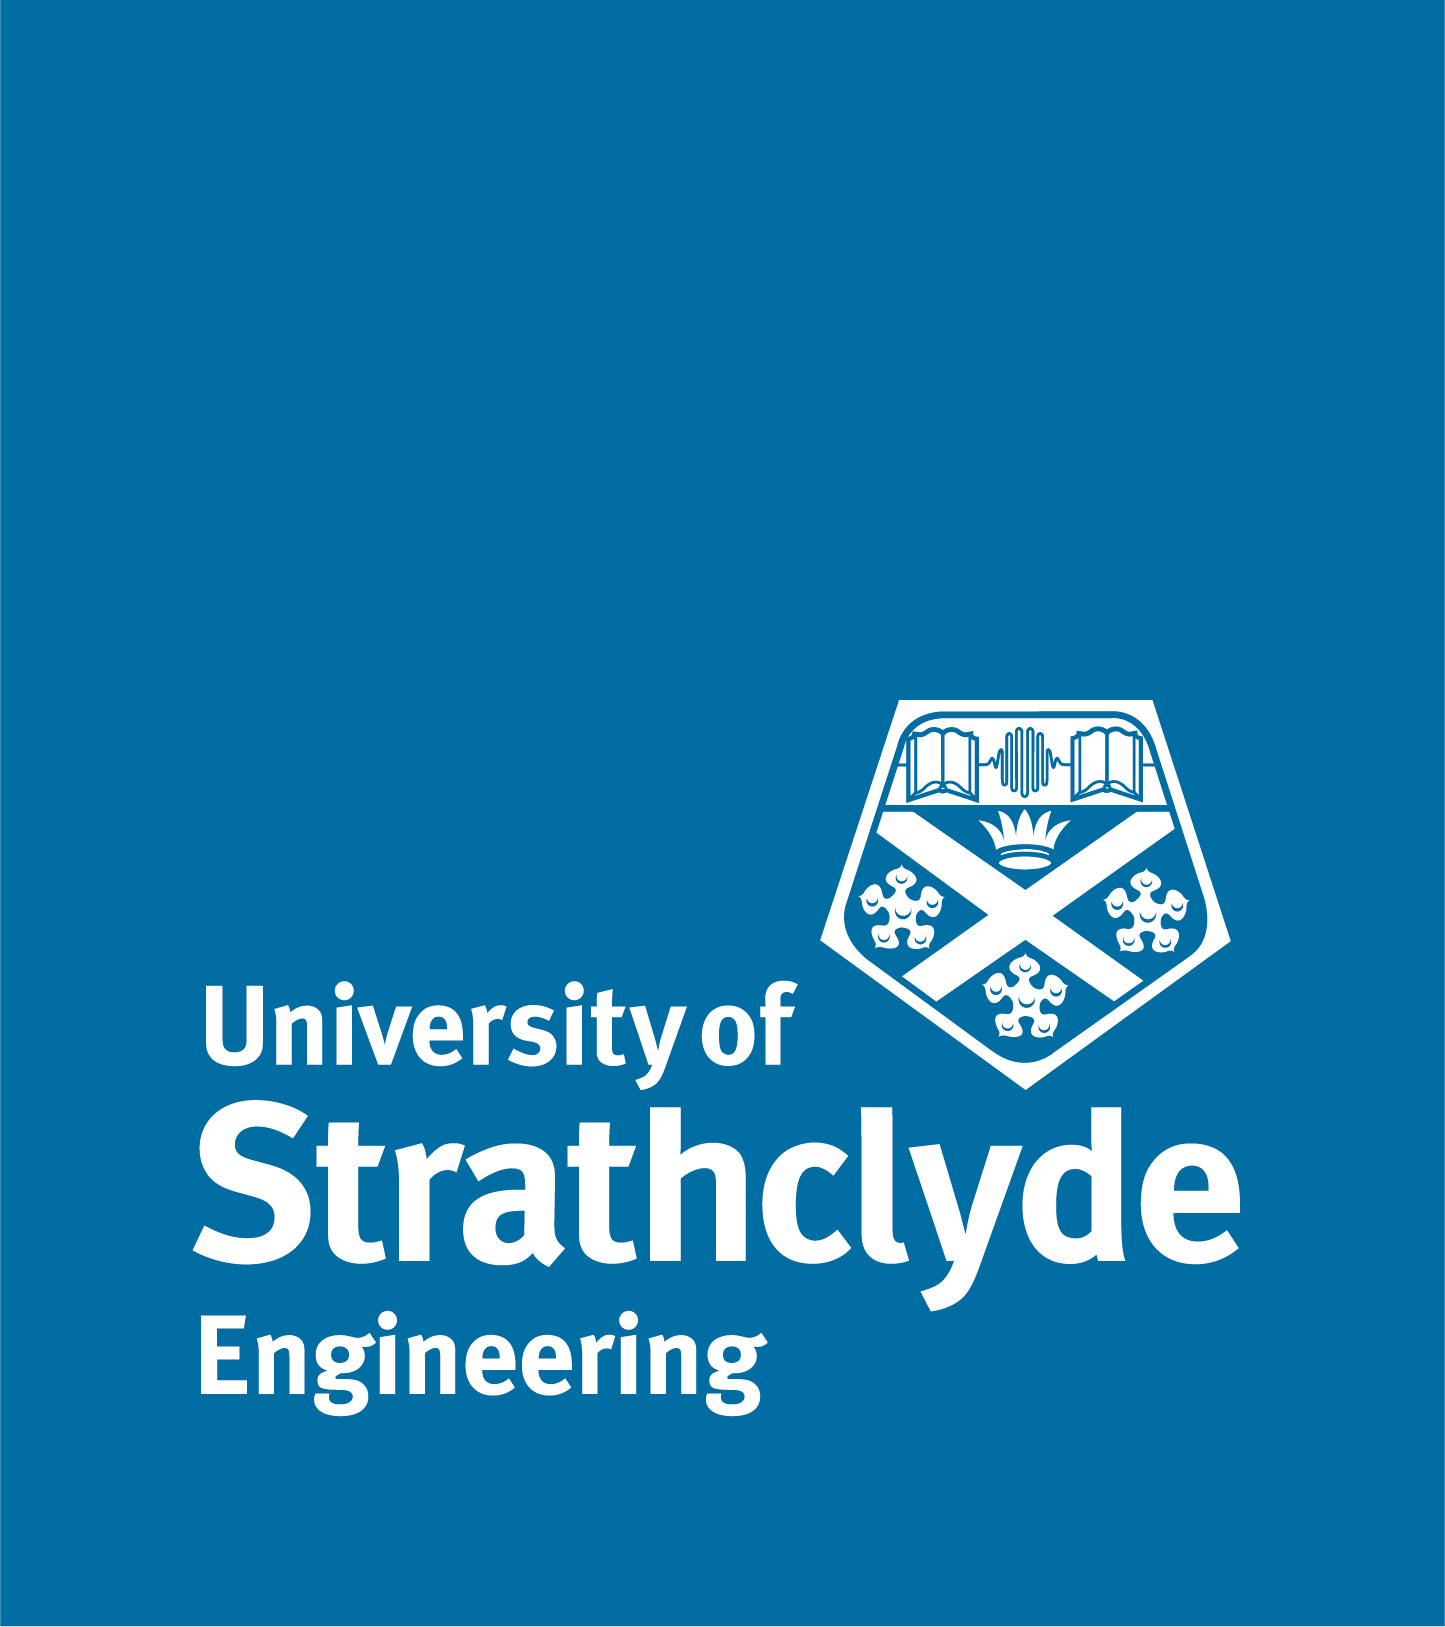 blue background with white logo and university of strathclyde engineering written in white text